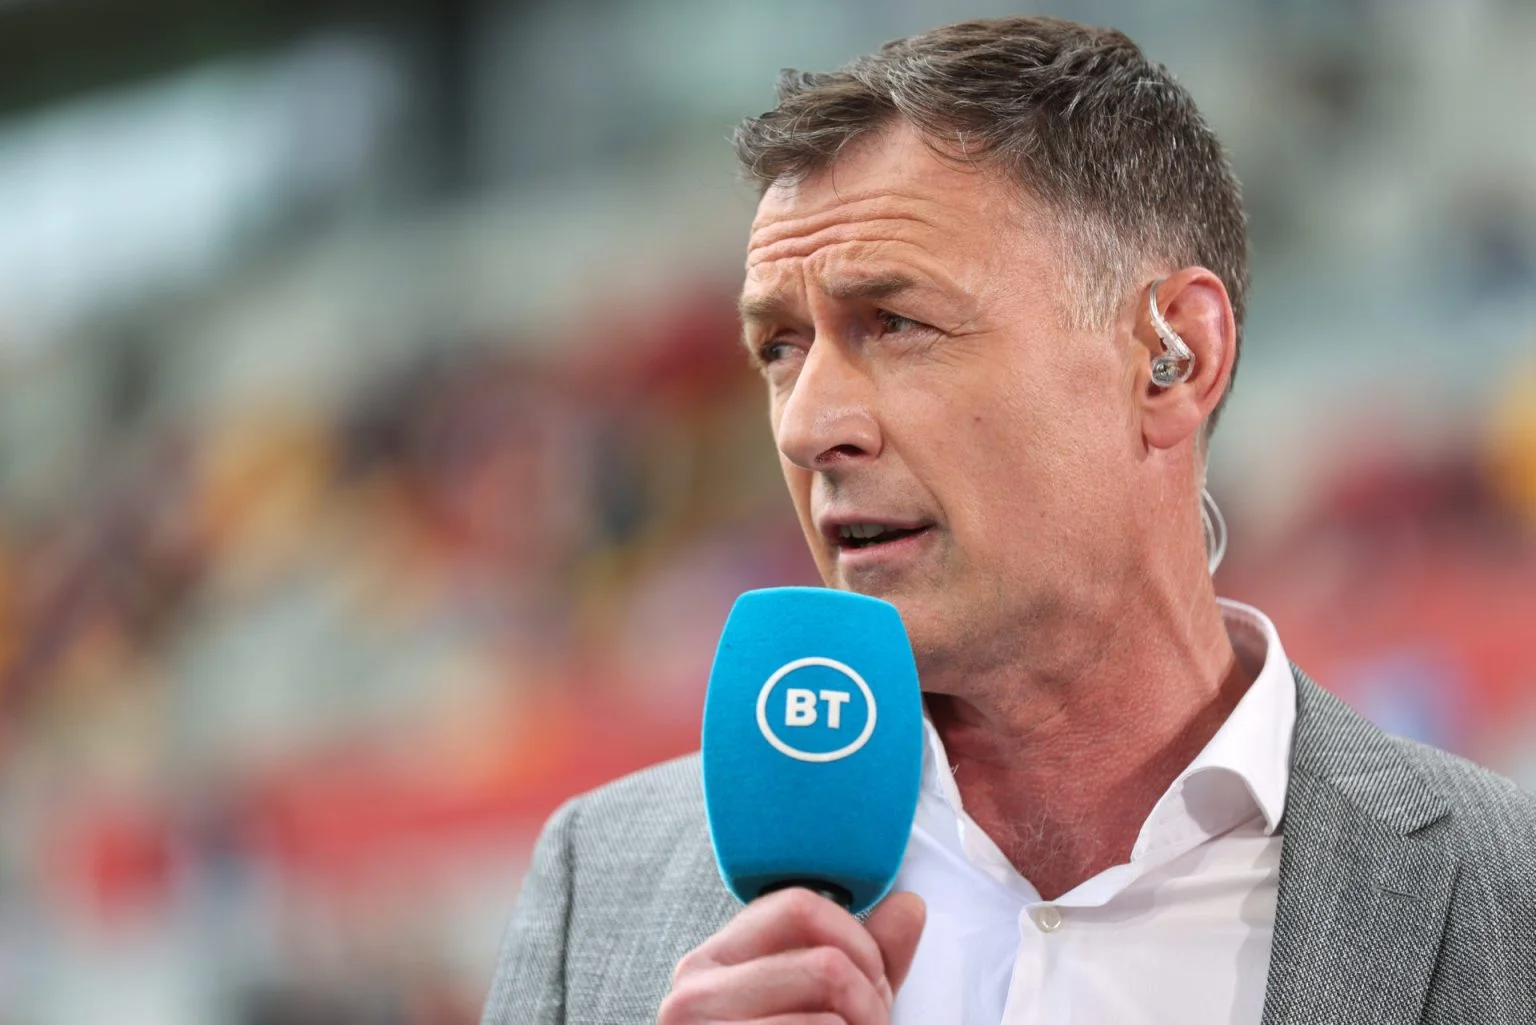 EPL: Chris Sutton predicts scores for Arsenal vs Man Utd, Chelsea, Man City, Liverpool, other fixtures